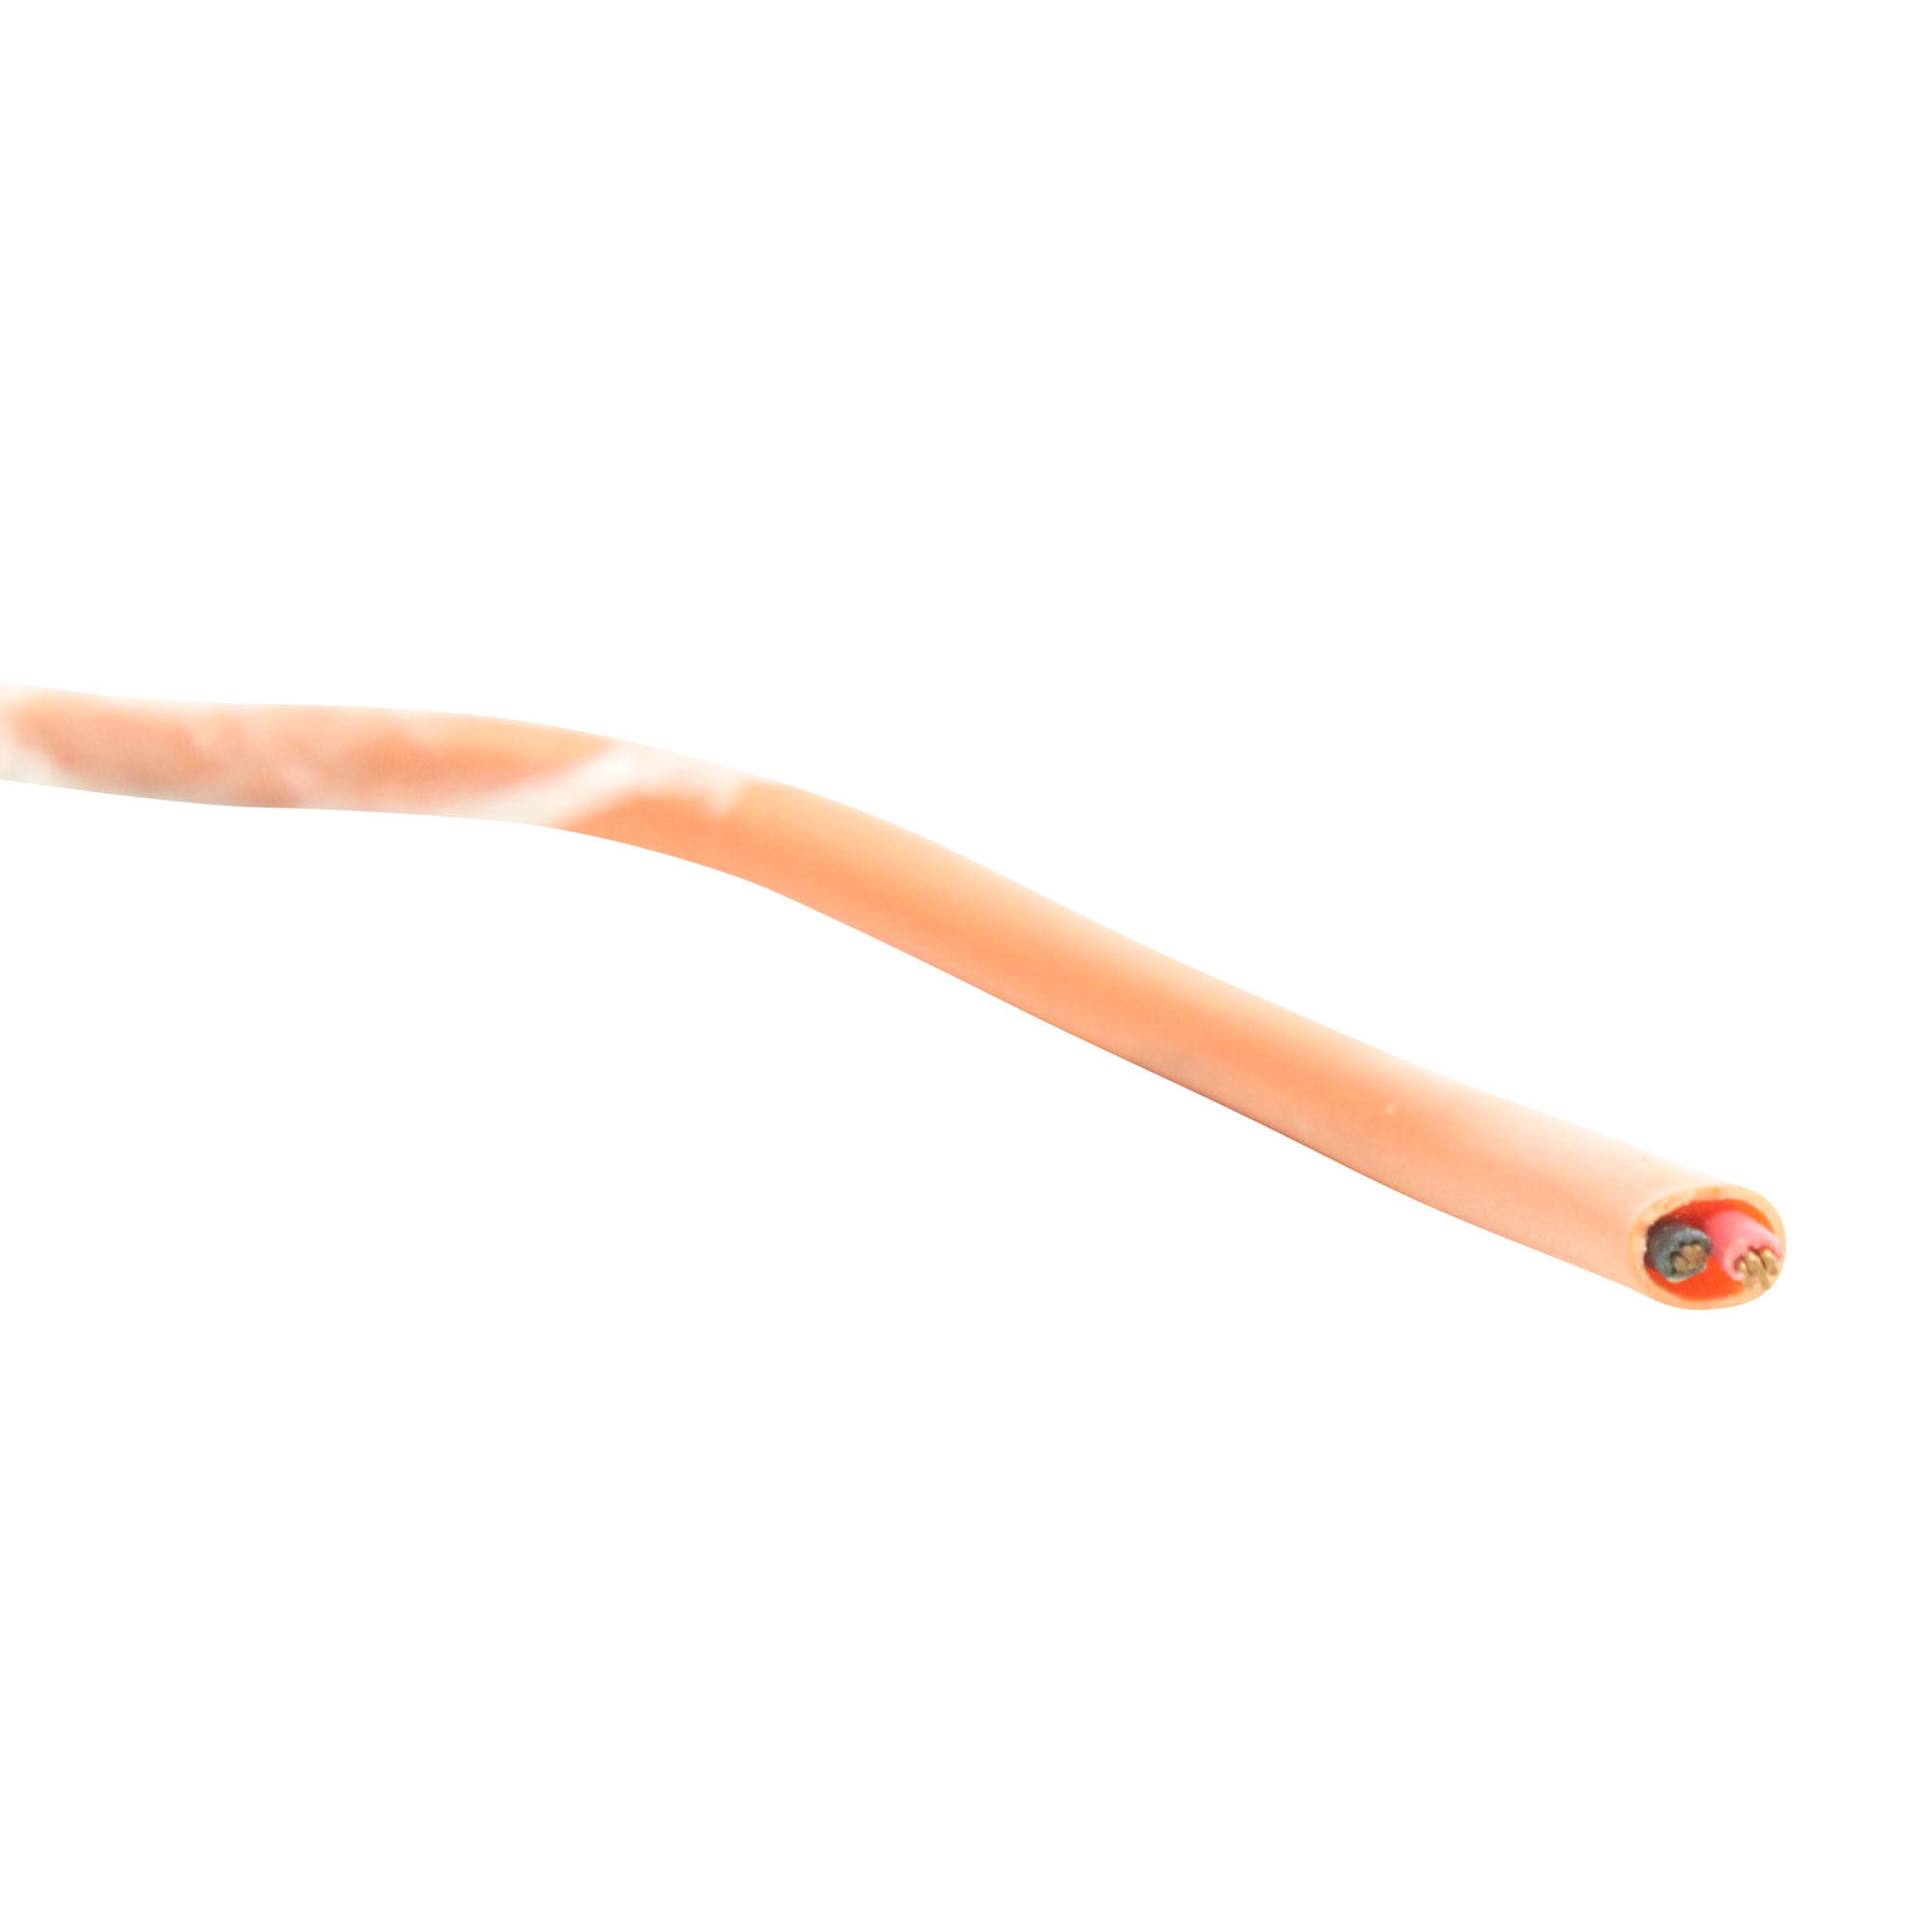 FASTER CABLE, FASTER CABLE P222C-ORG 22AWG 2C, 22/2 STR PLENUM CONTROL CABLE, ORANGE, 1000'